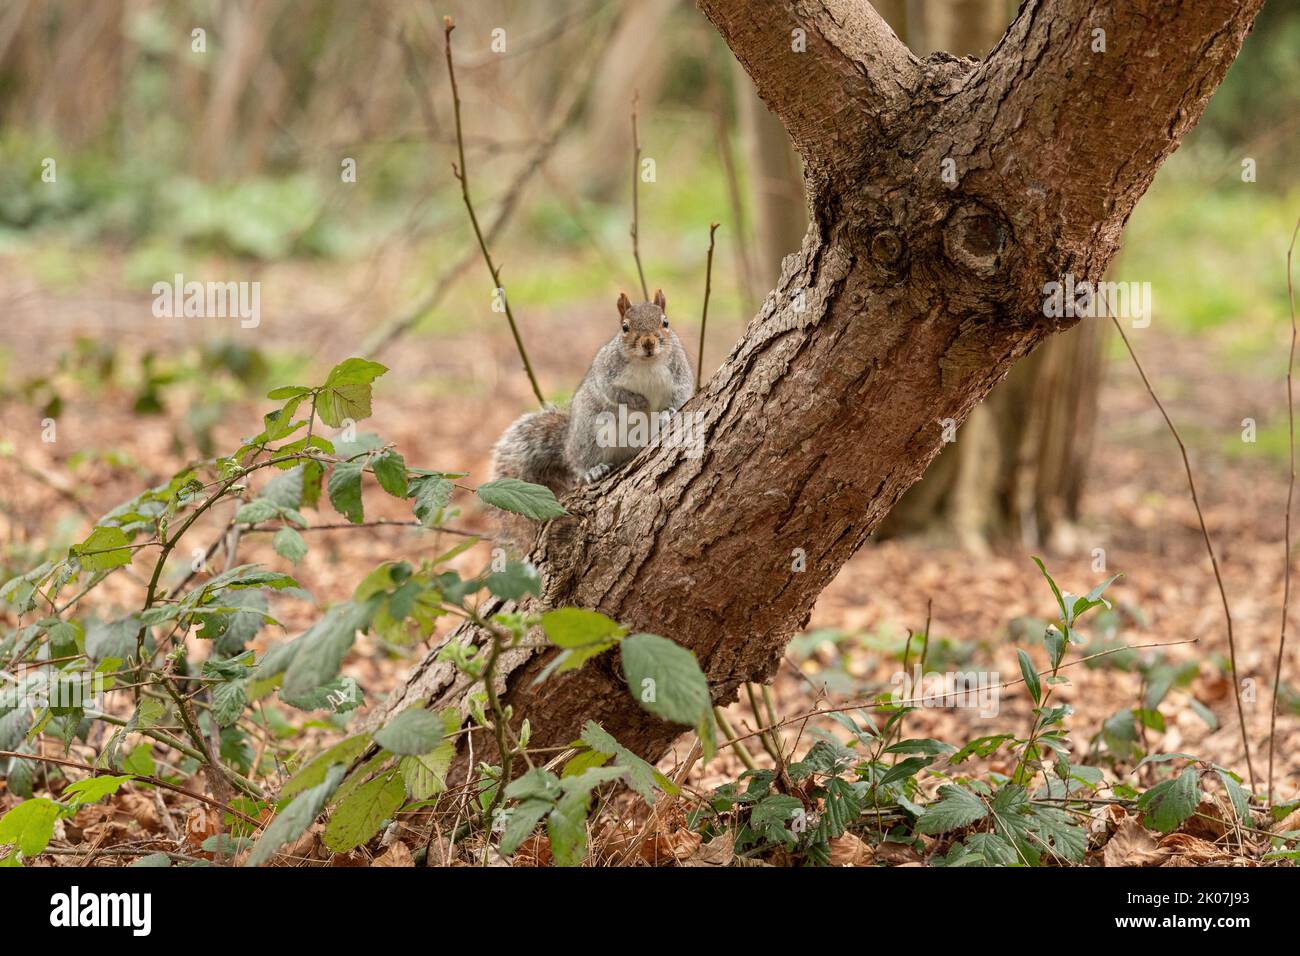 Grey UK squirrel sitting in a tree looking at the camera, in natural environment Stock Photo